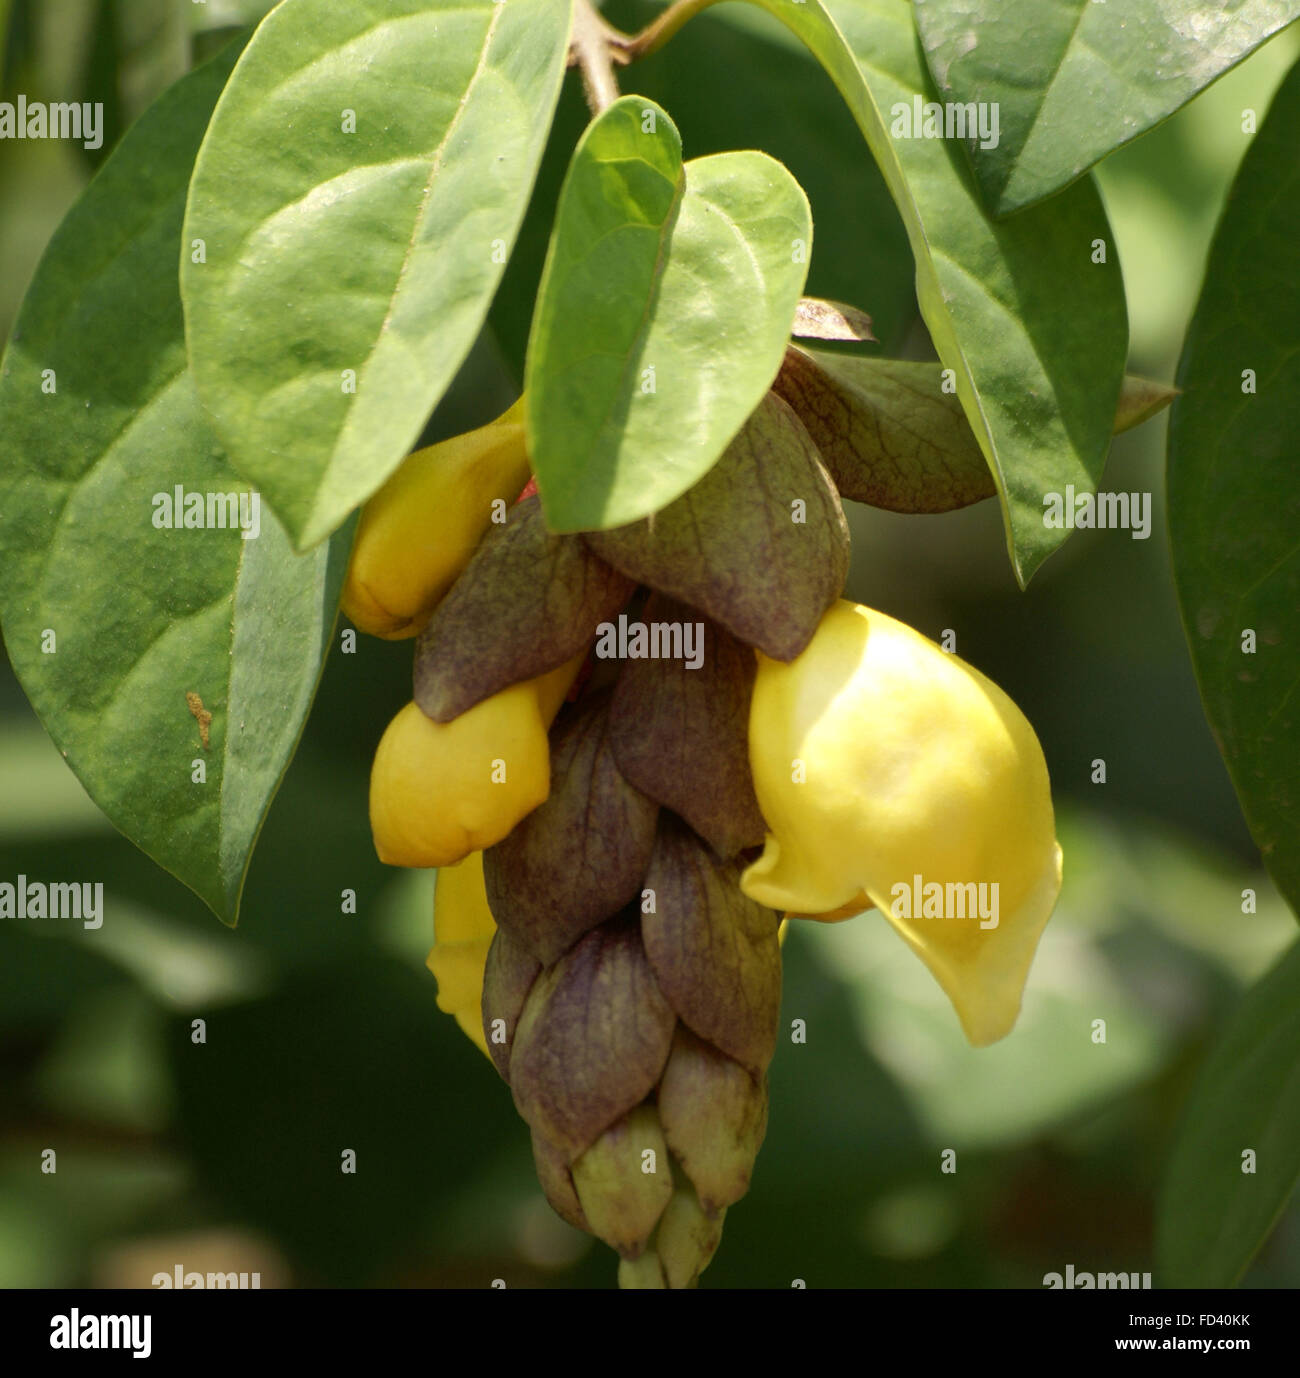 Gmelina philippensis, Parrot's beak, Scandent evergreen shrub with simple green leaves, spiny branches and yellow flowers Stock Photo